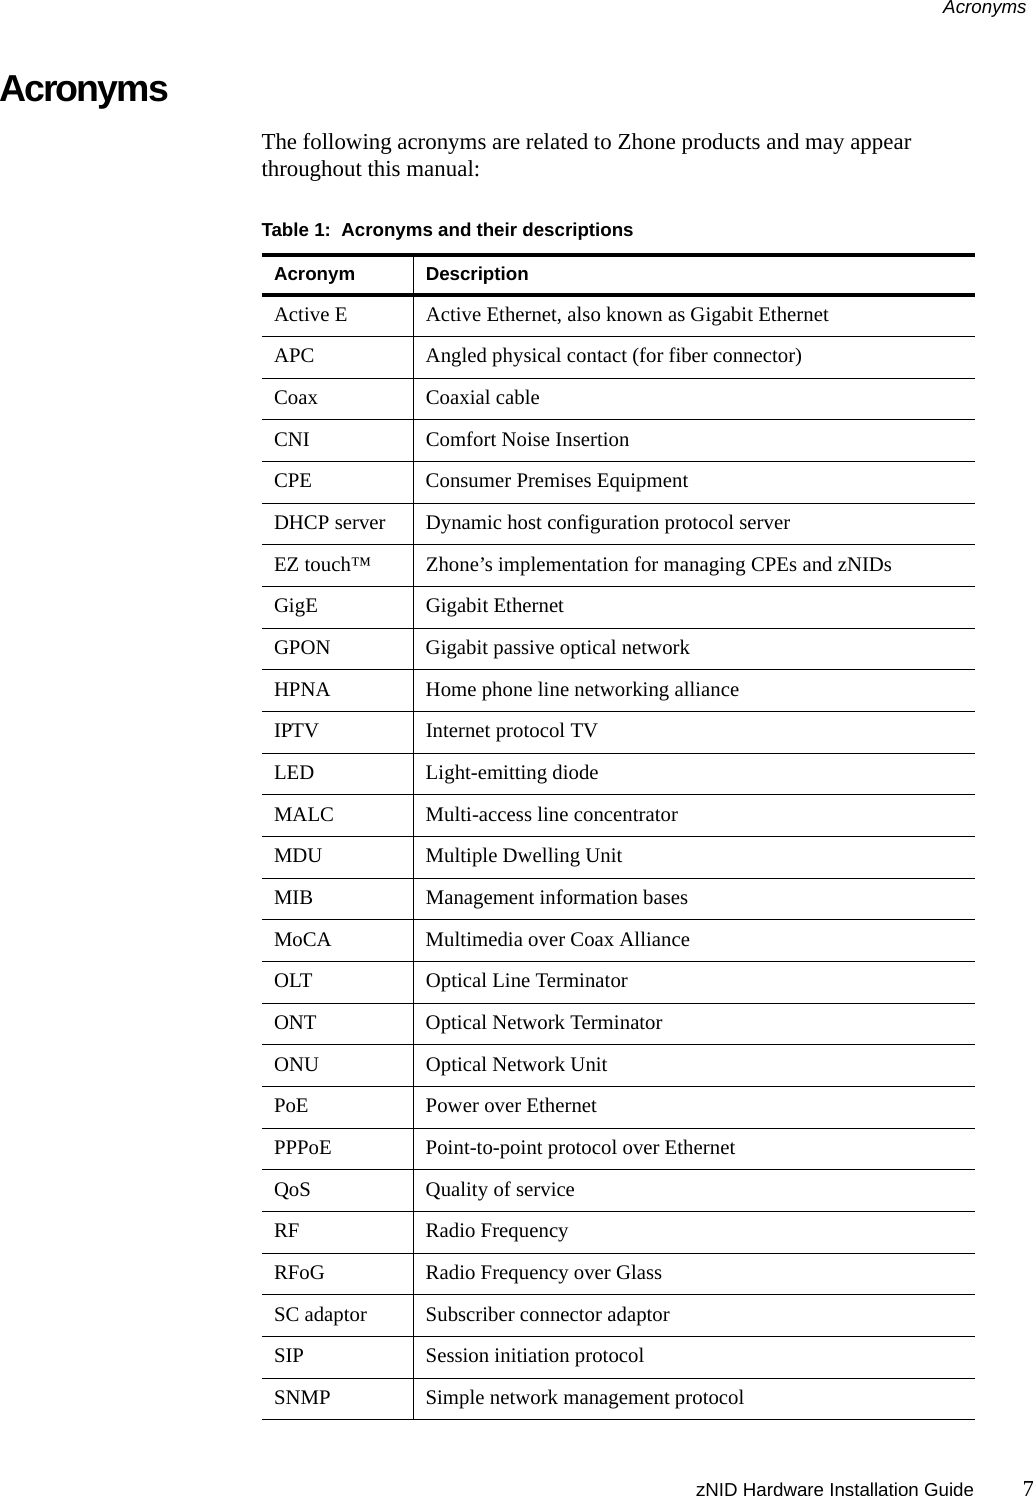 Acronyms zNID Hardware Installation Guide 7AcronymsThe following acronyms are related to Zhone products and may appear throughout this manual:Table 1:  Acronyms and their descriptionsAcronym DescriptionActive E Active Ethernet, also known as Gigabit EthernetAPC Angled physical contact (for fiber connector)Coax Coaxial cableCNI Comfort Noise InsertionCPE Consumer Premises EquipmentDHCP server Dynamic host configuration protocol serverEZ touch™ Zhone’s implementation for managing CPEs and zNIDsGigE Gigabit EthernetGPON Gigabit passive optical networkHPNA  Home phone line networking allianceIPTV Internet protocol TVLED Light-emitting diodeMALC Multi-access line concentratorMDU Multiple Dwelling UnitMIB Management information basesMoCA Multimedia over Coax AllianceOLT Optical Line TerminatorONT Optical Network TerminatorONU Optical Network UnitPoE Power over EthernetPPPoE Point-to-point protocol over EthernetQoS Quality of serviceRF Radio FrequencyRFoG Radio Frequency over GlassSC adaptor Subscriber connector adaptorSIP Session initiation protocolSNMP Simple network management protocol